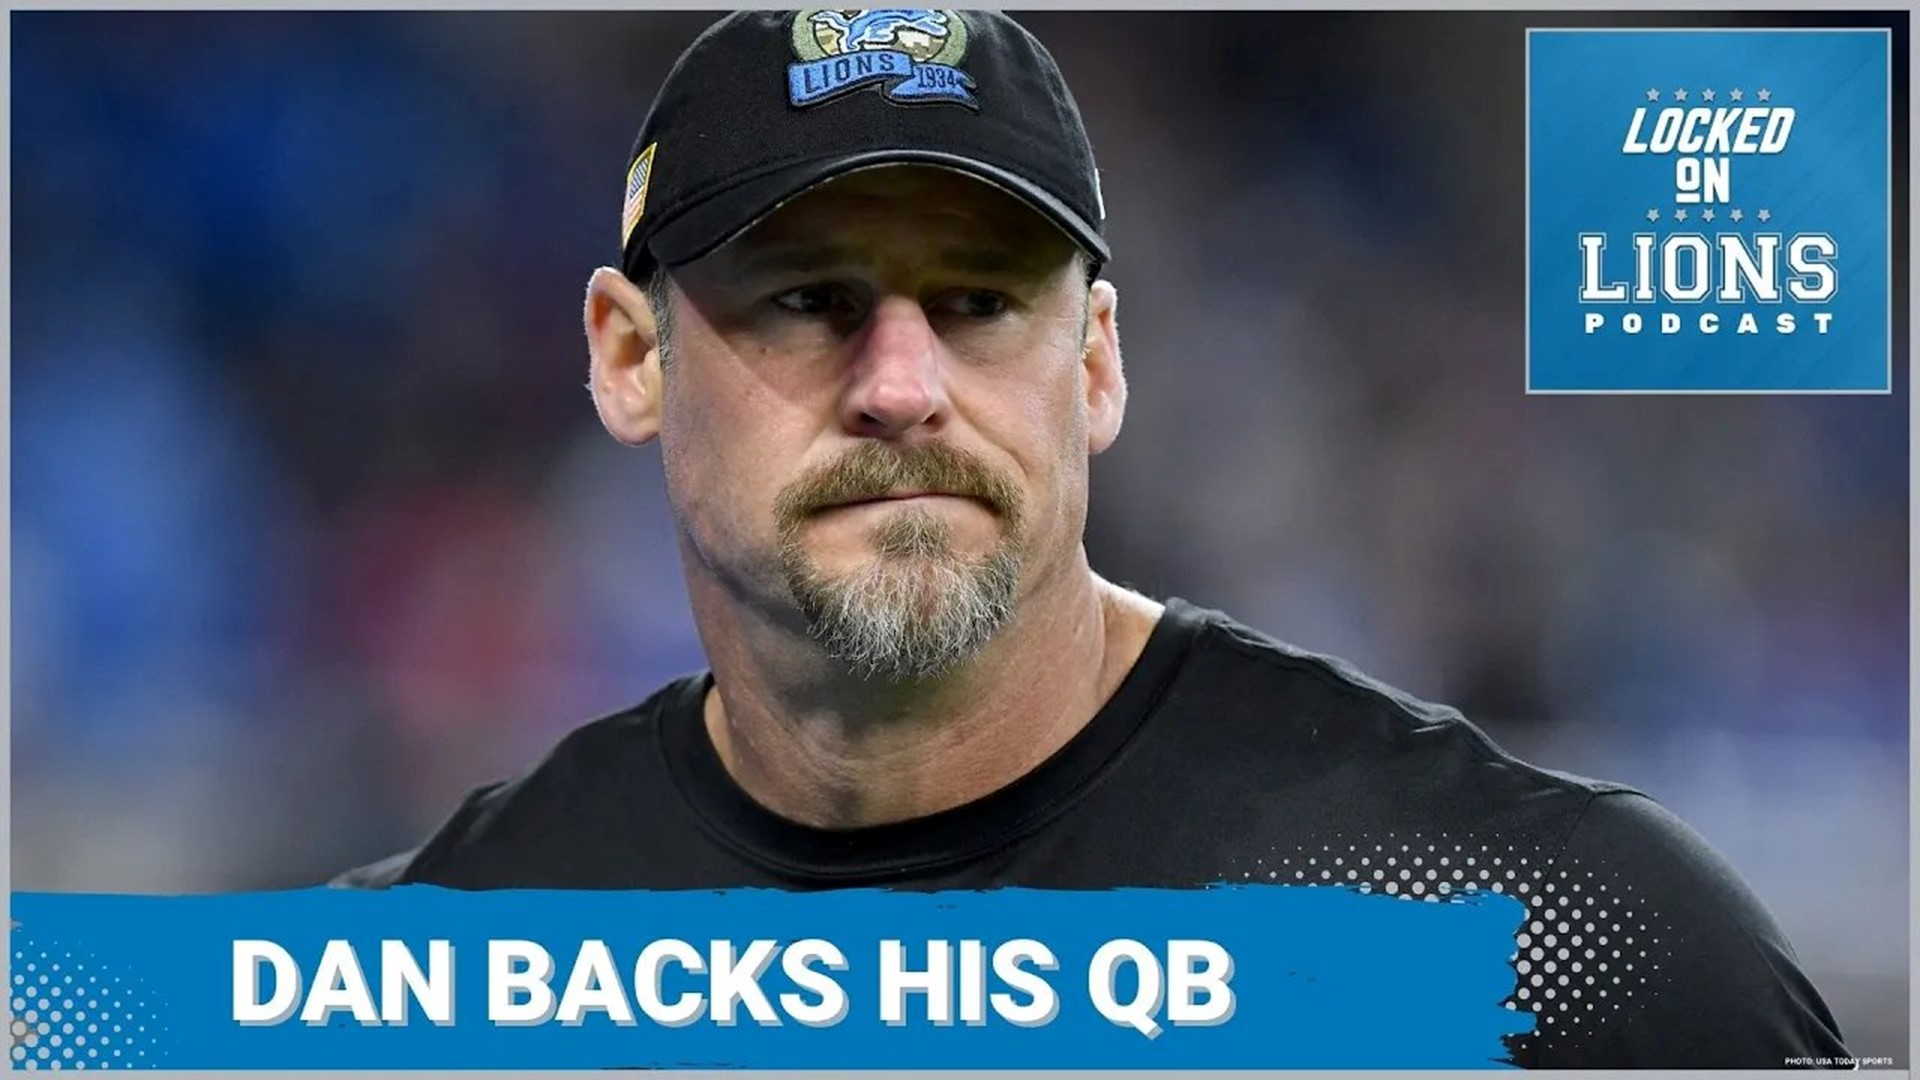 Dan Campbell appears to squash any Lamar to Detroit rumors. Plus, it's Mock Draft Mon. #firstlisten